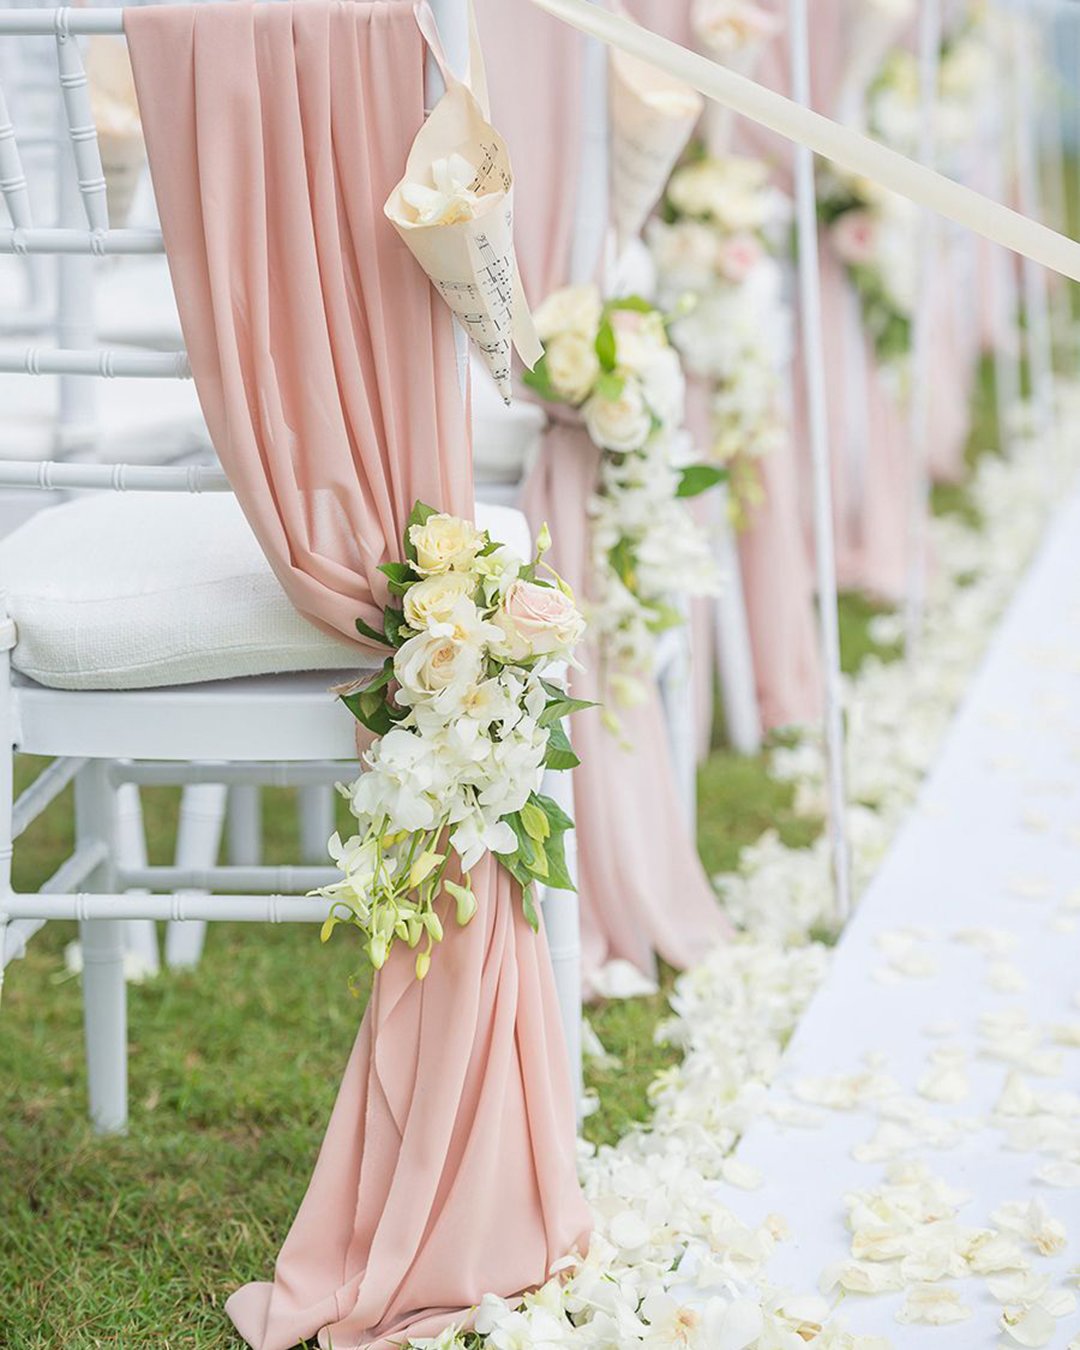 wedding ceremony decorations white flowers and pink drapink decorate darinimages